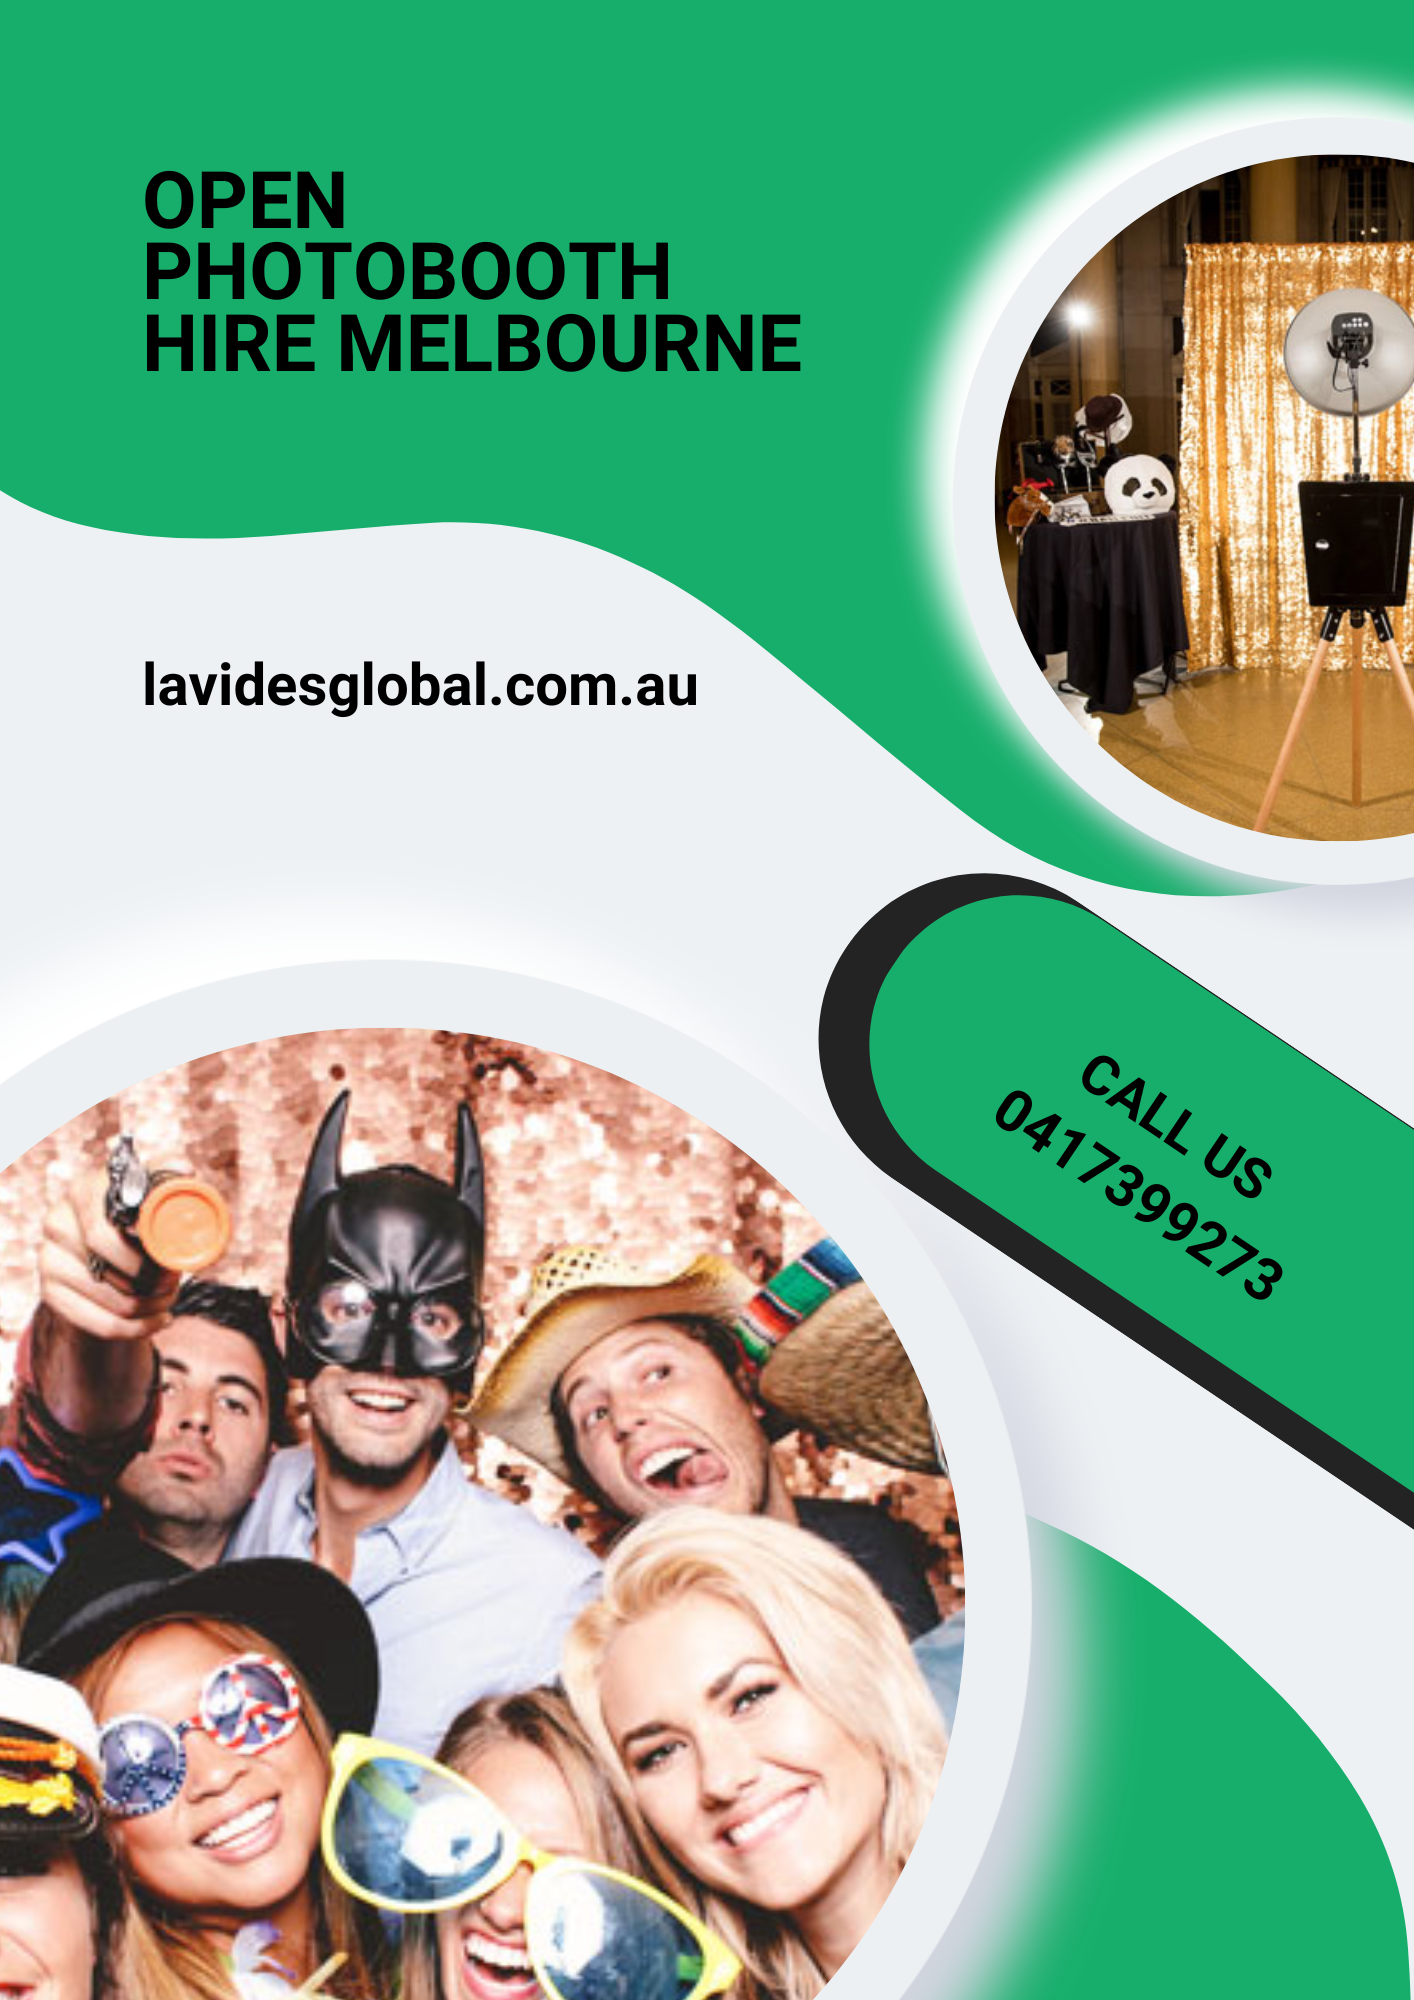 Open Photobooth Hire Melbourne